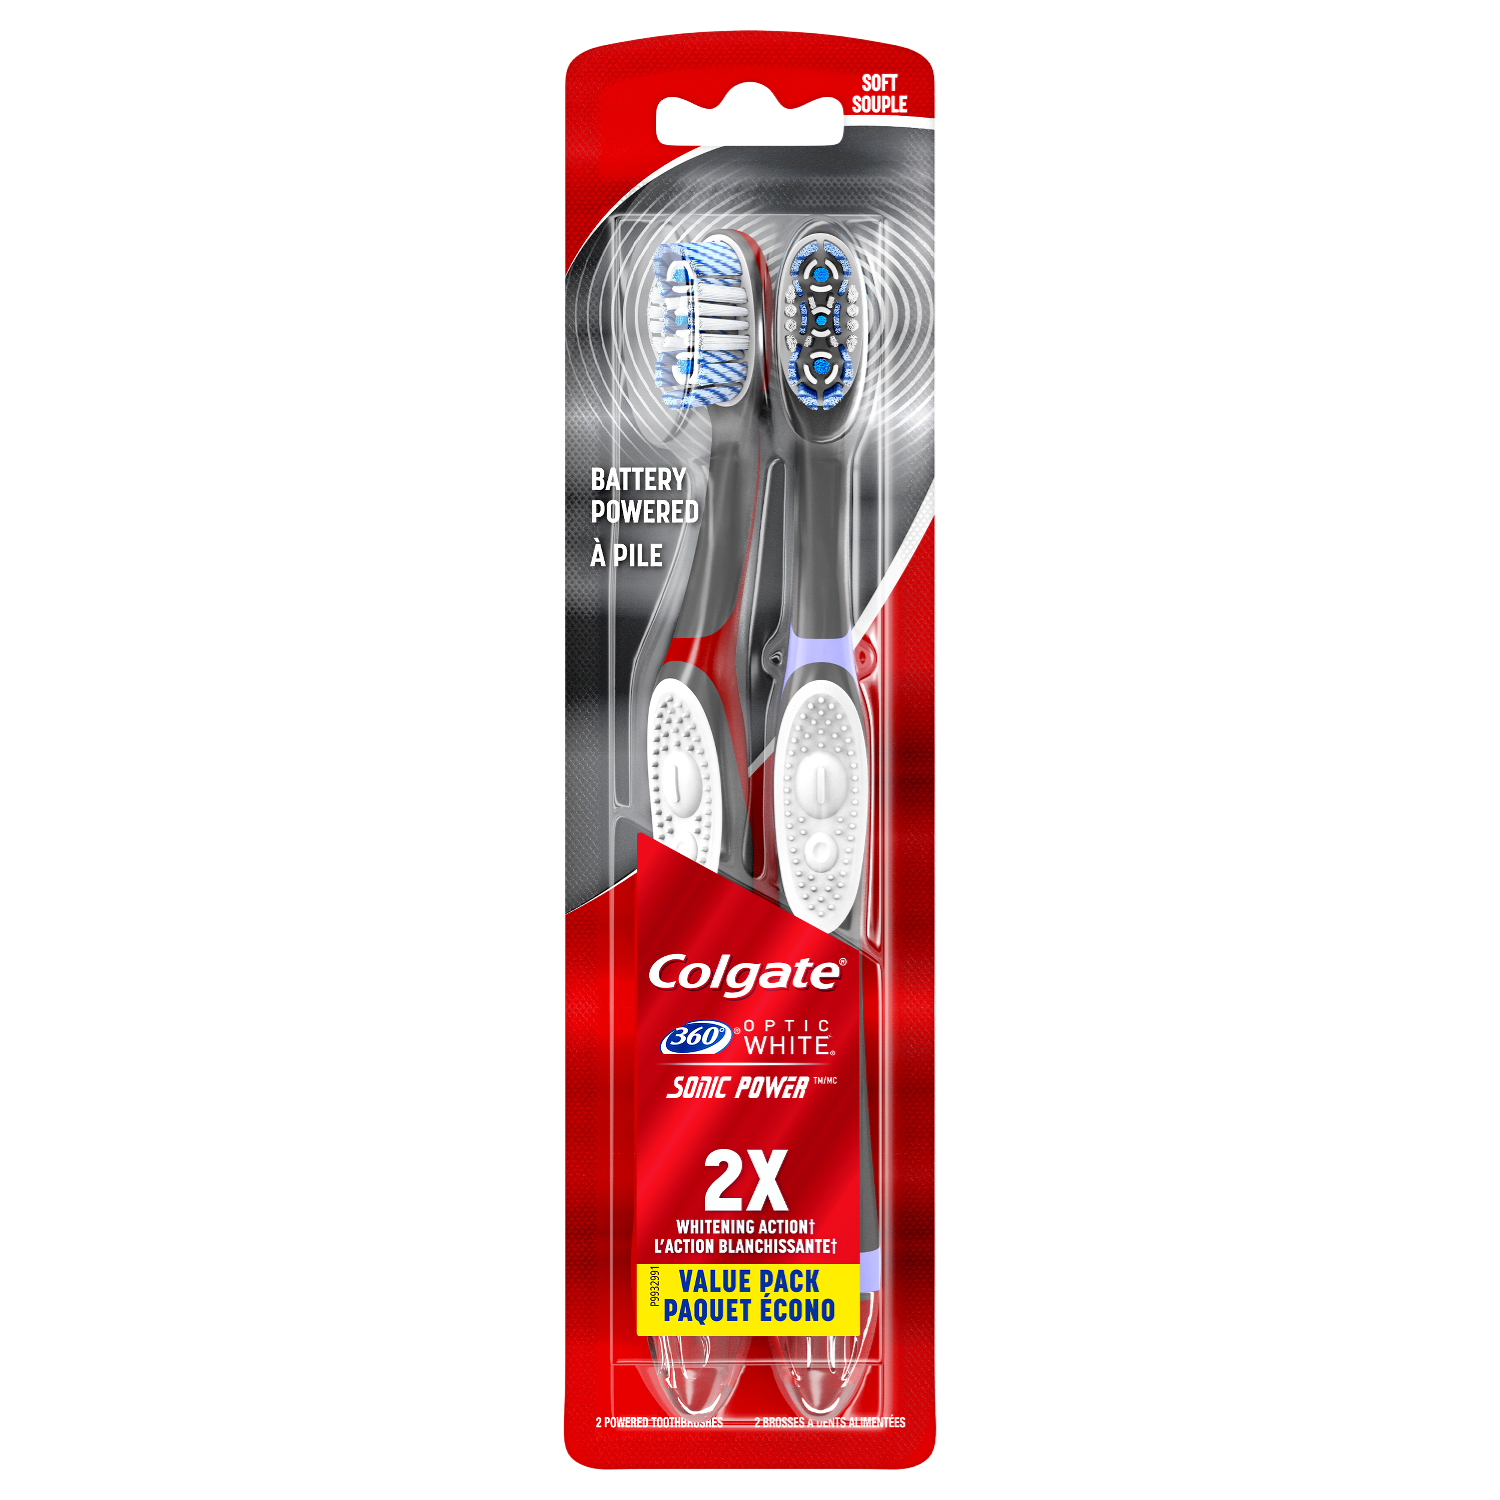 Colgate 360 Optic White Sonic Powered Vibrating Soft Toothbrush - 2 Count - image 1 of 5